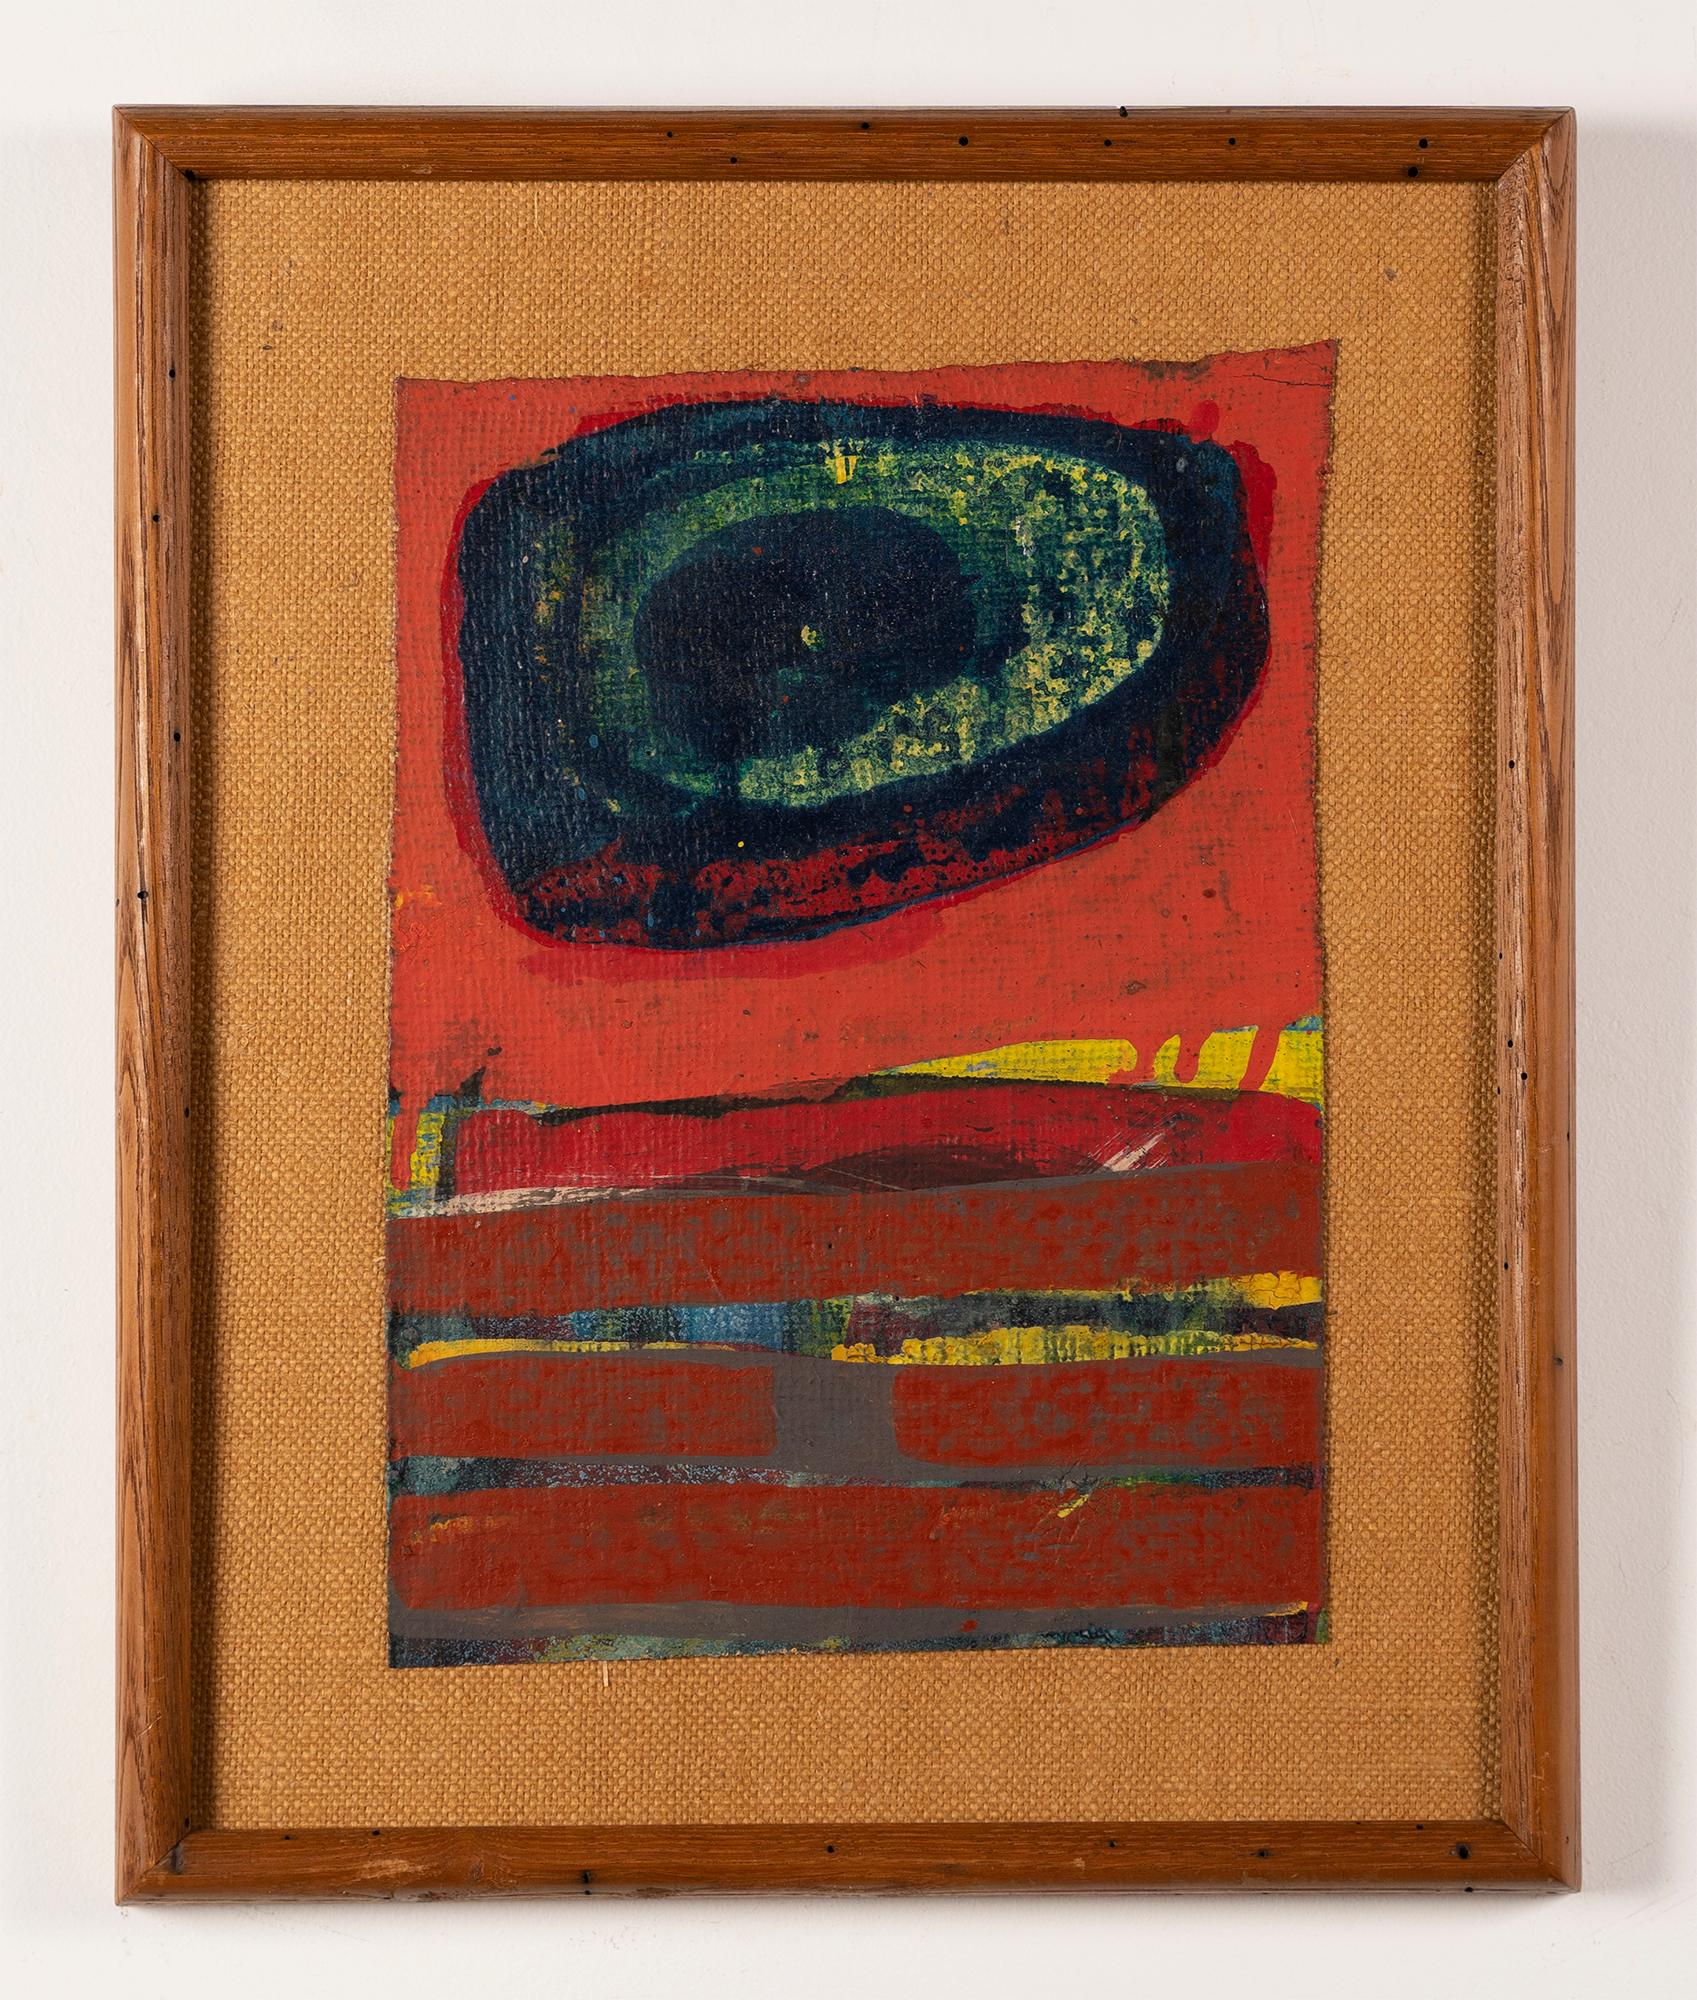 Vintage American modernist abstract oil painting.  Oil on board, circa 1950.  Unsigned.  Image size, 16L x 20H.  Housed in a period modernist frame.